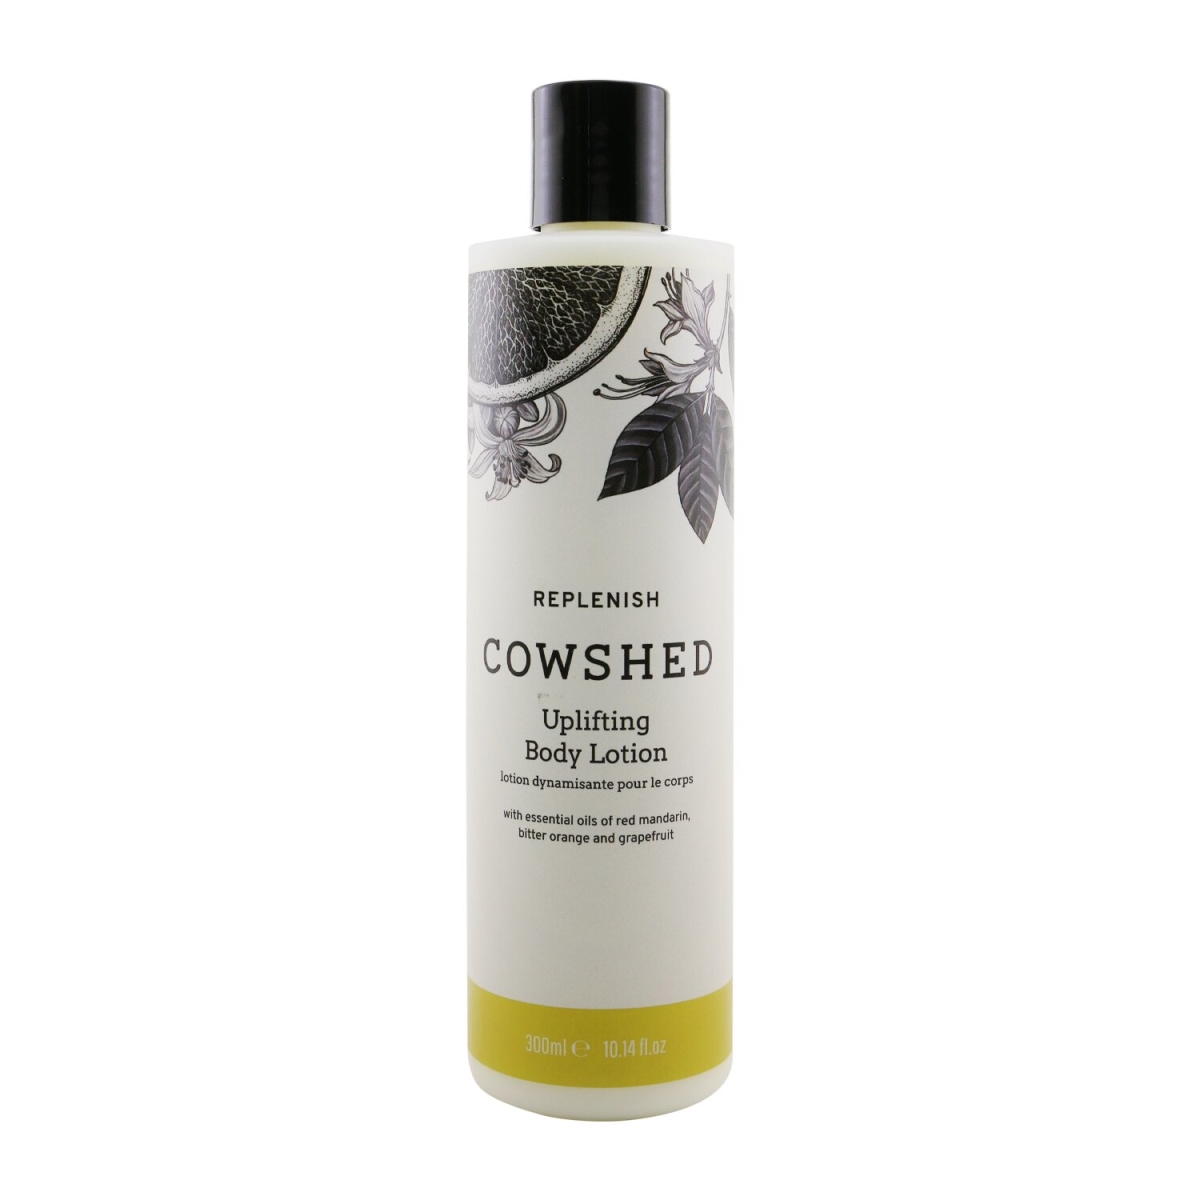 Picture of Cowshed 265848 10.14 oz Replenish Uplifting Body Lotion